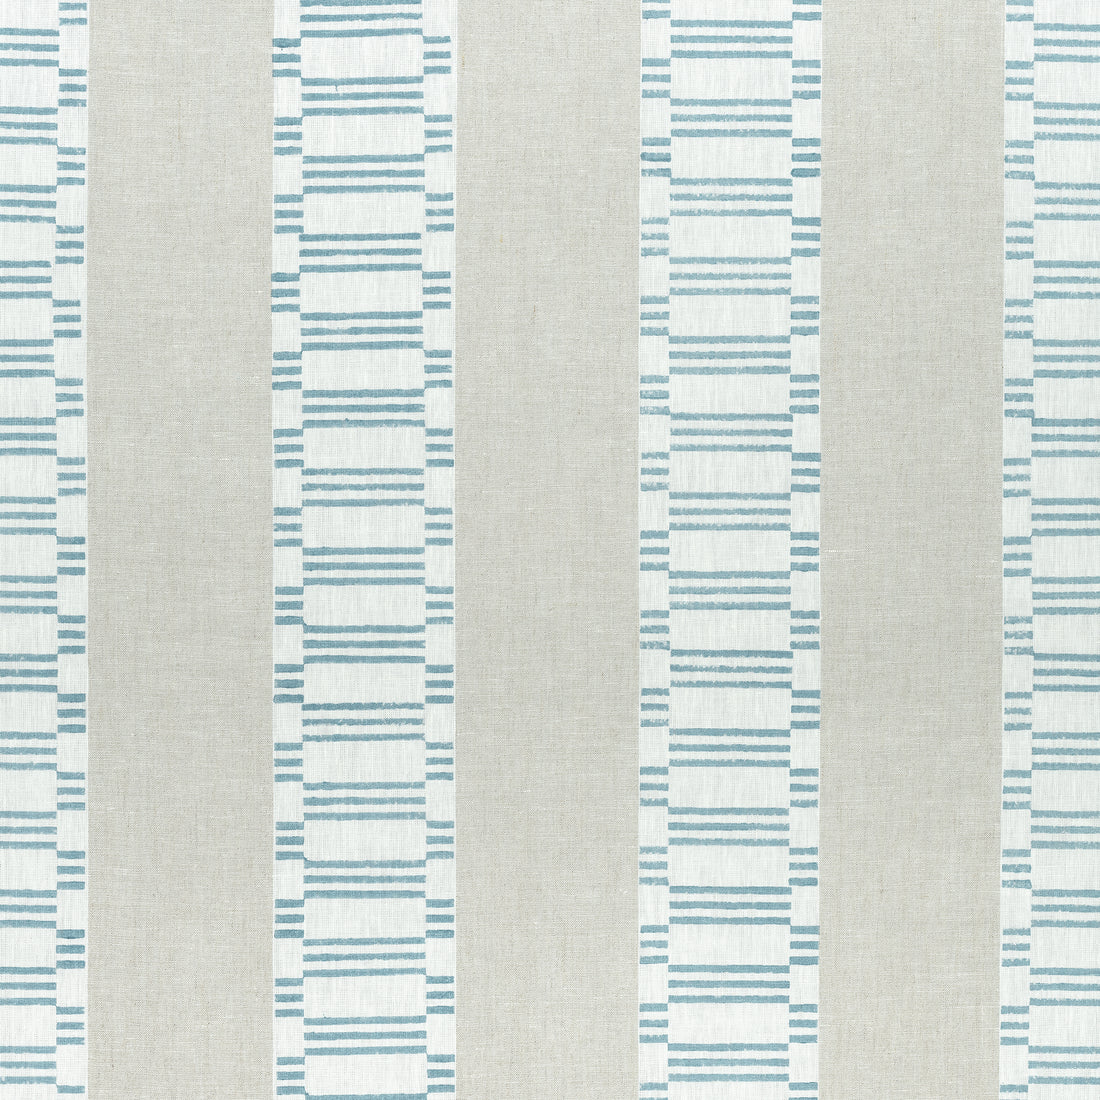 Japonic Stripe fabric in robins egg color - pattern number AF9821 - by Anna French in the Nara collection